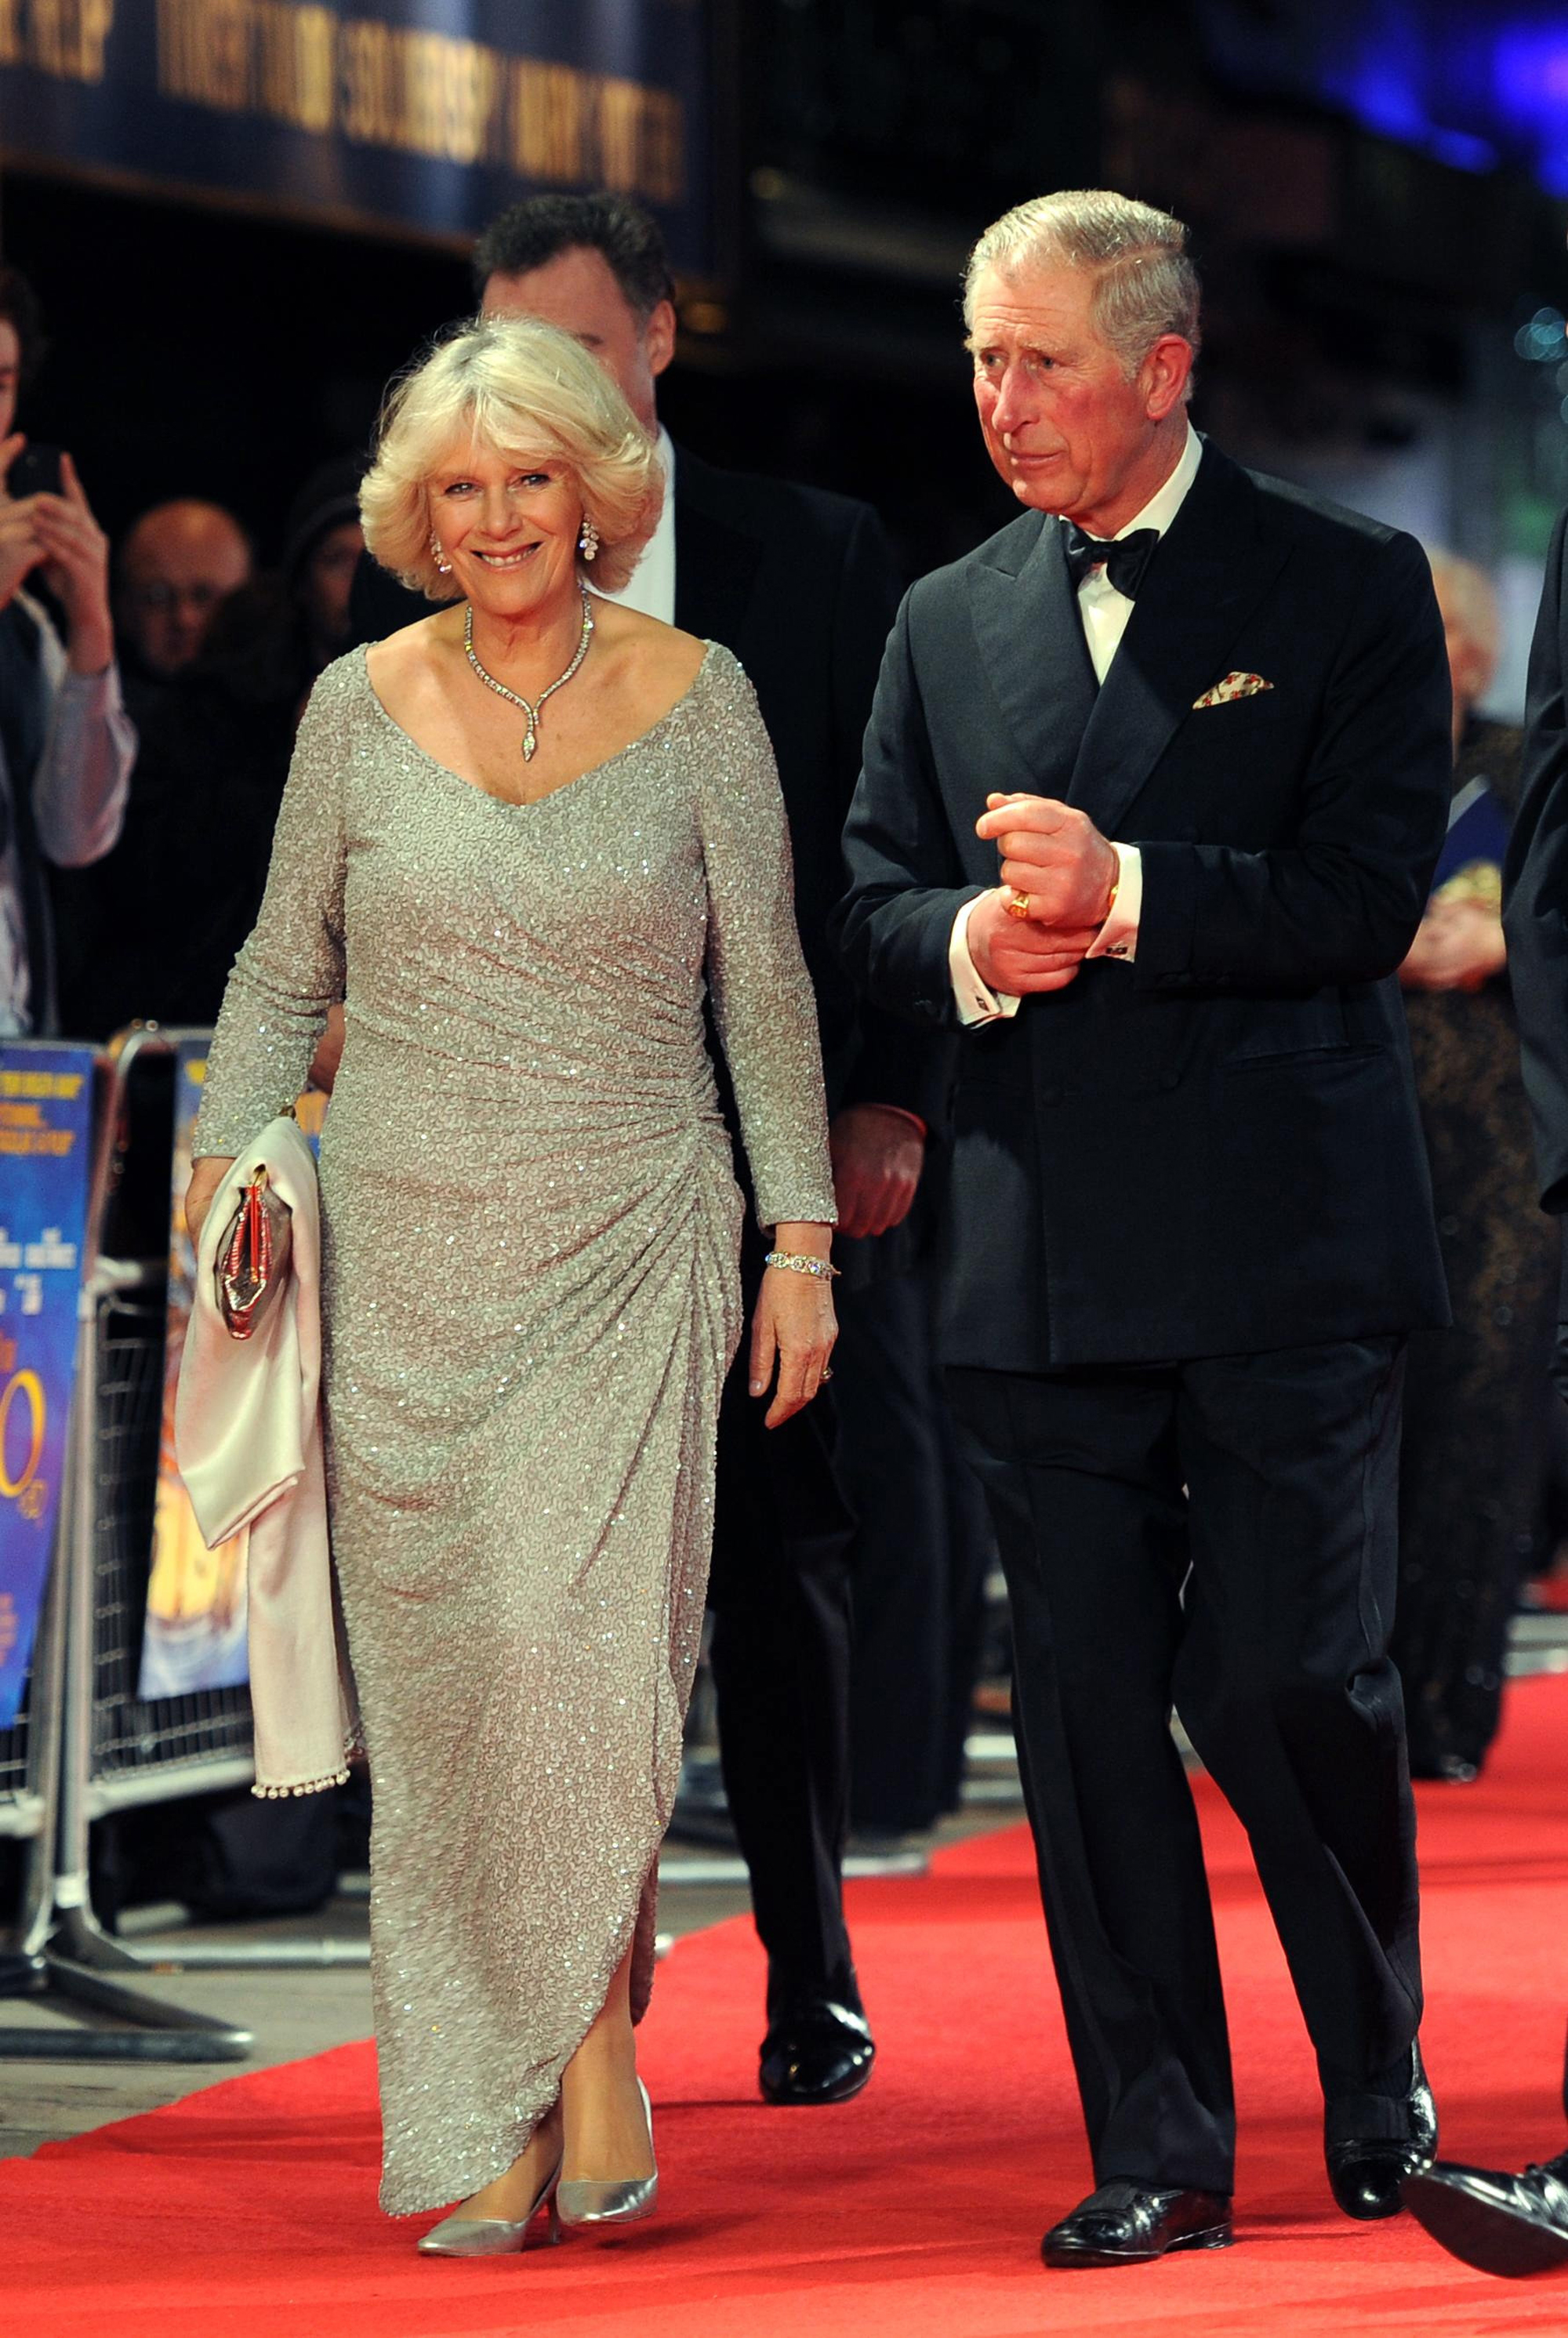 The Prince of Wales and Duchess of Cornwall arrive for the Royal Film Performance 2011 of Hugo